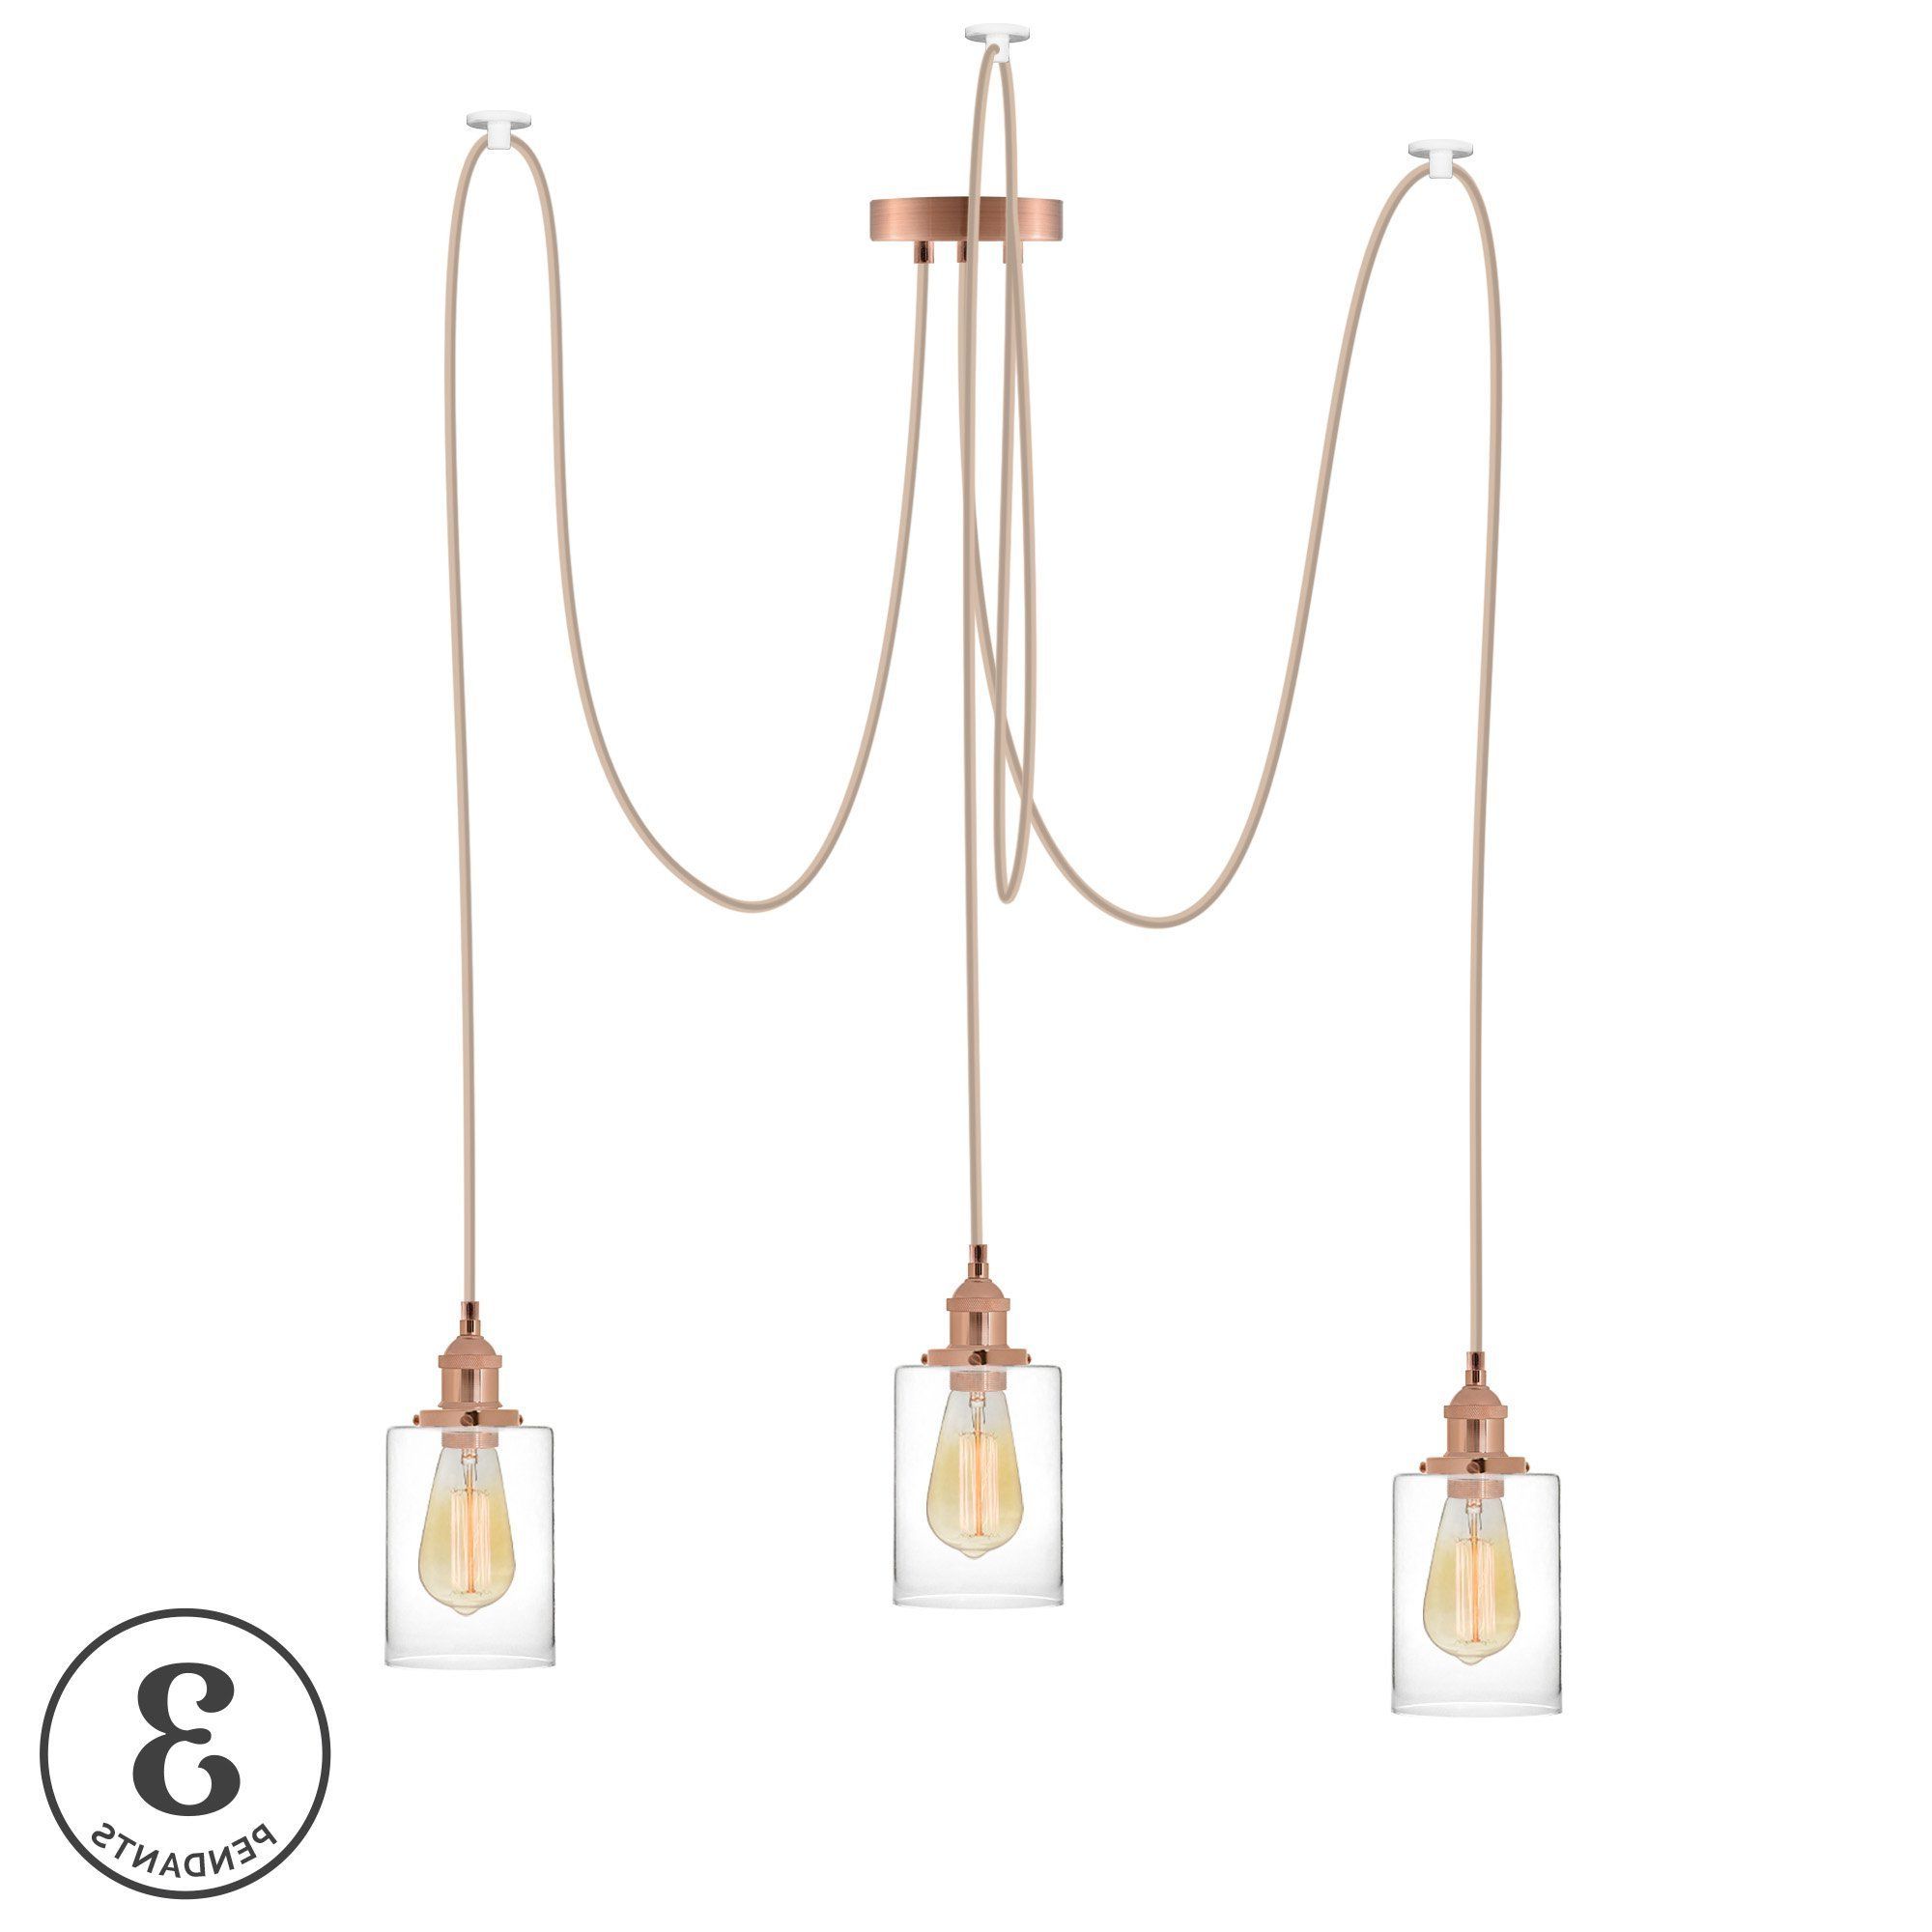 Esai 3 Light Cluster Pendant With Regard To Preferred Gattilier 3 Light Cluster Pendants (View 5 of 20)